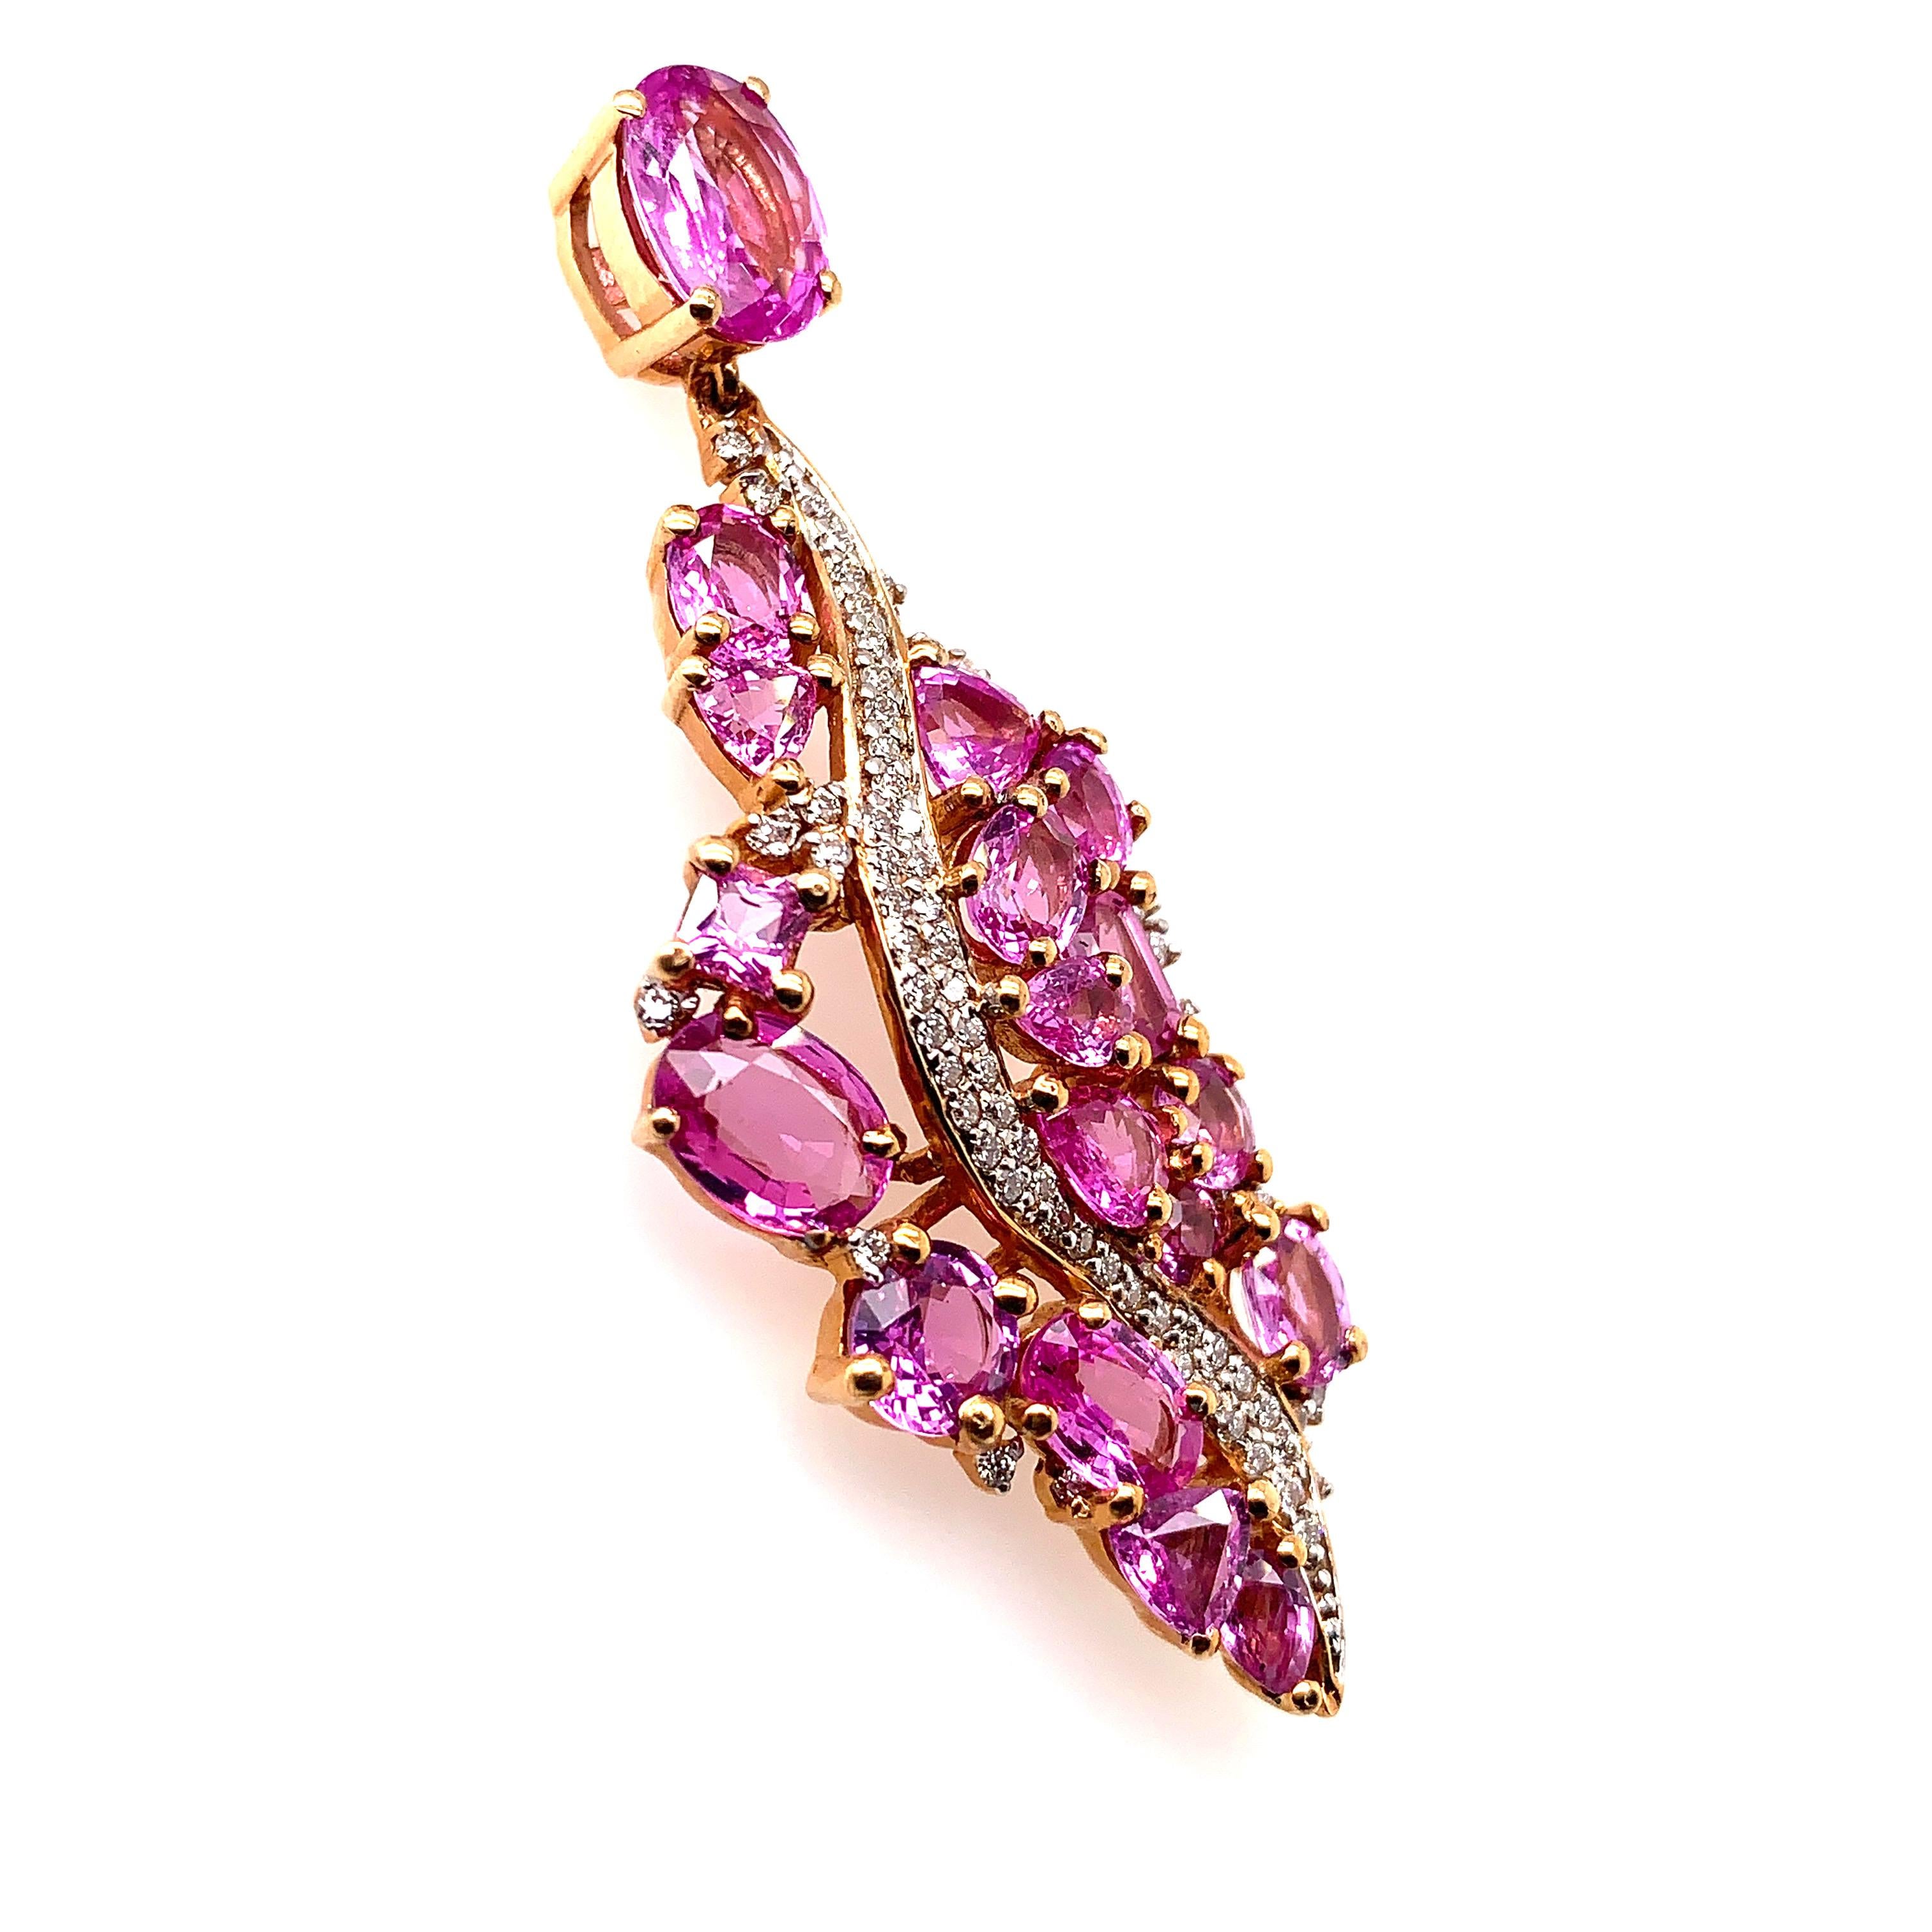 Contemporary 14.32 Carat Pink Sapphire Earring in 18 Karat Rose Gold with Diamonds